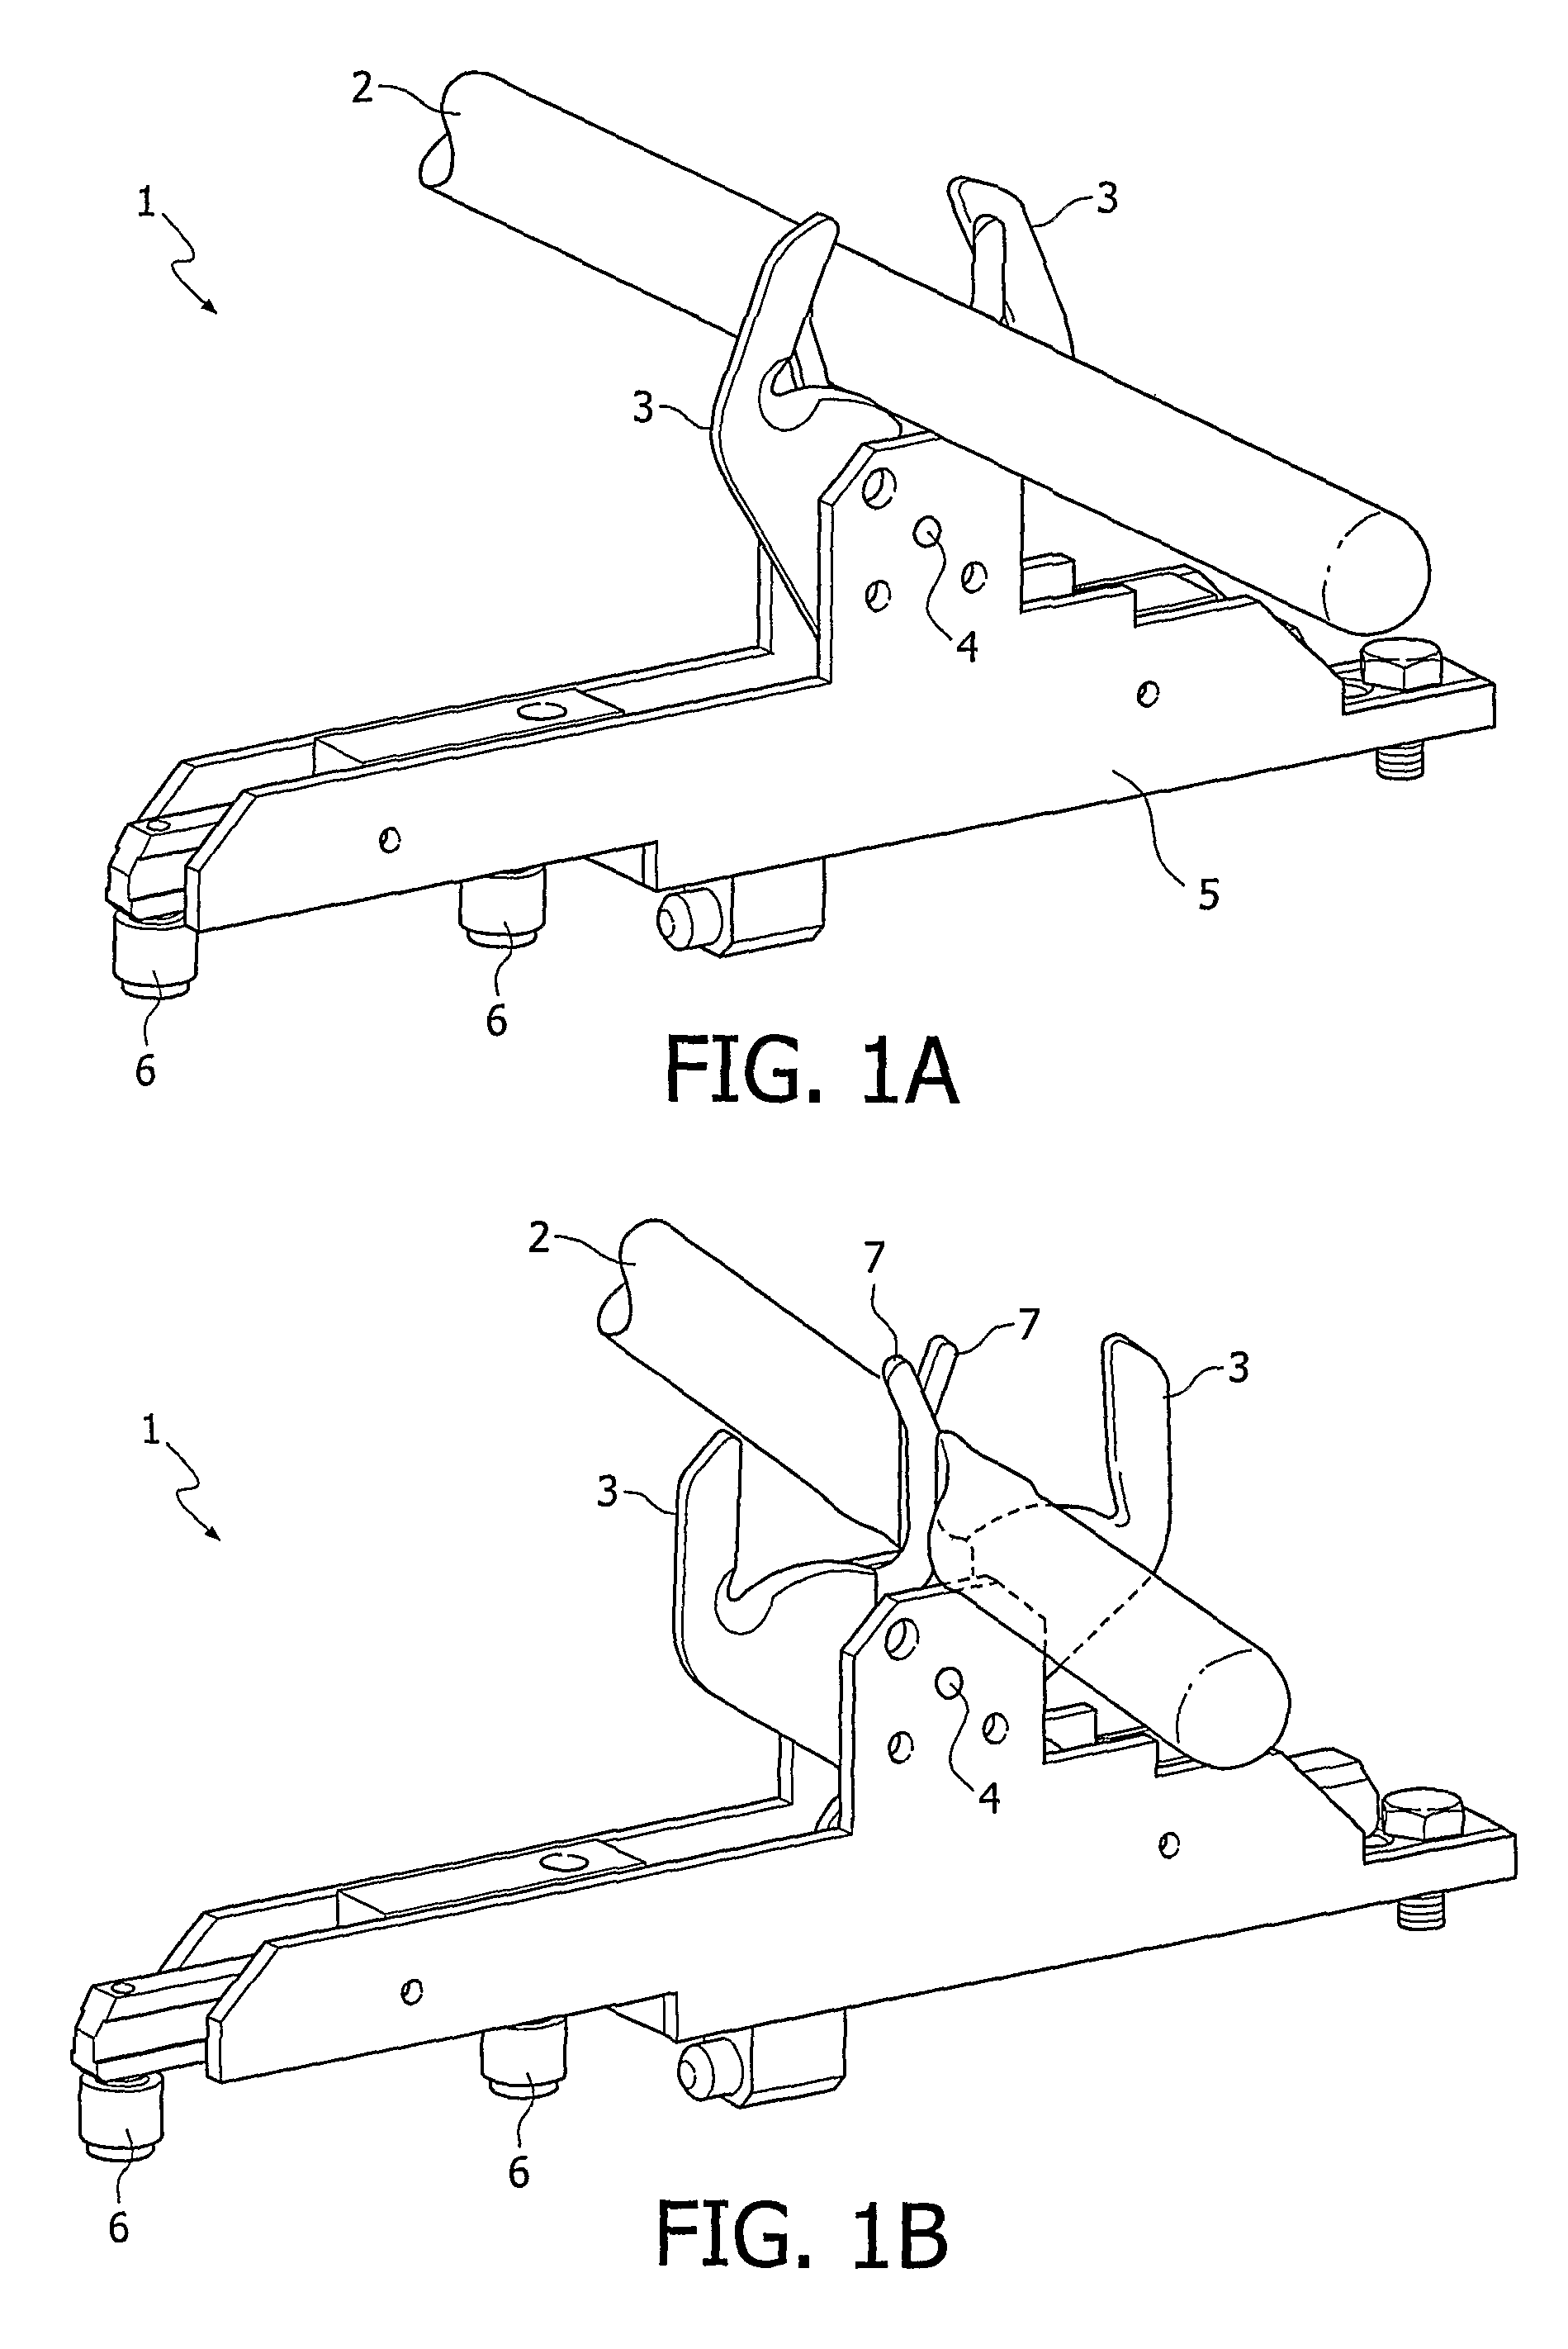 Method for phased separation of a sausage strand, separating element and assembly of separating elements